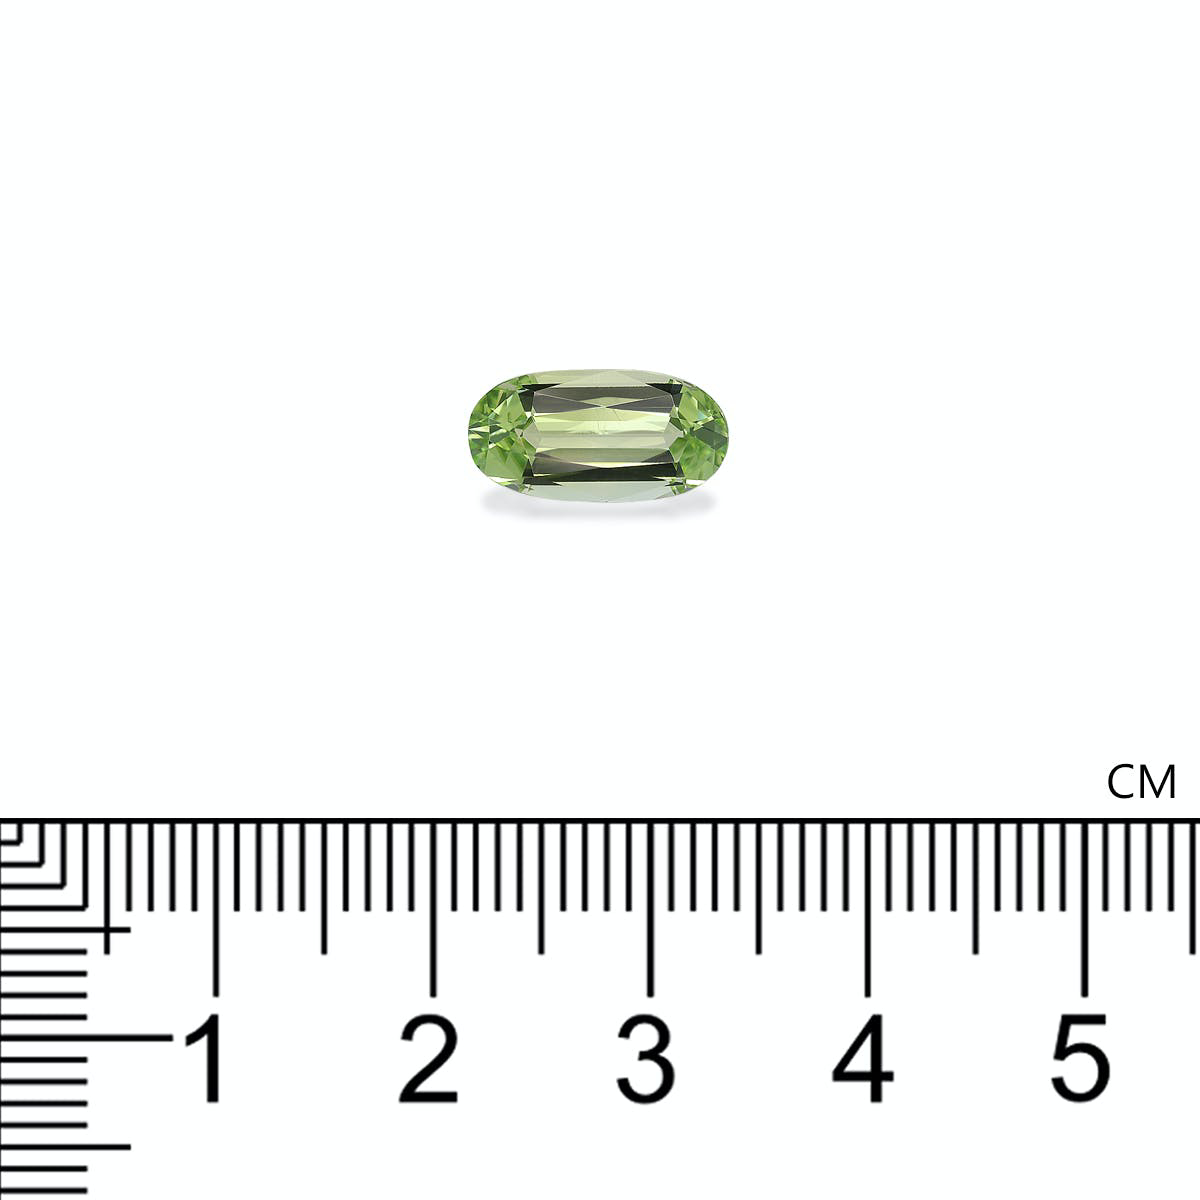 Picture of Green Tourmaline 2.22ct (TG1662)